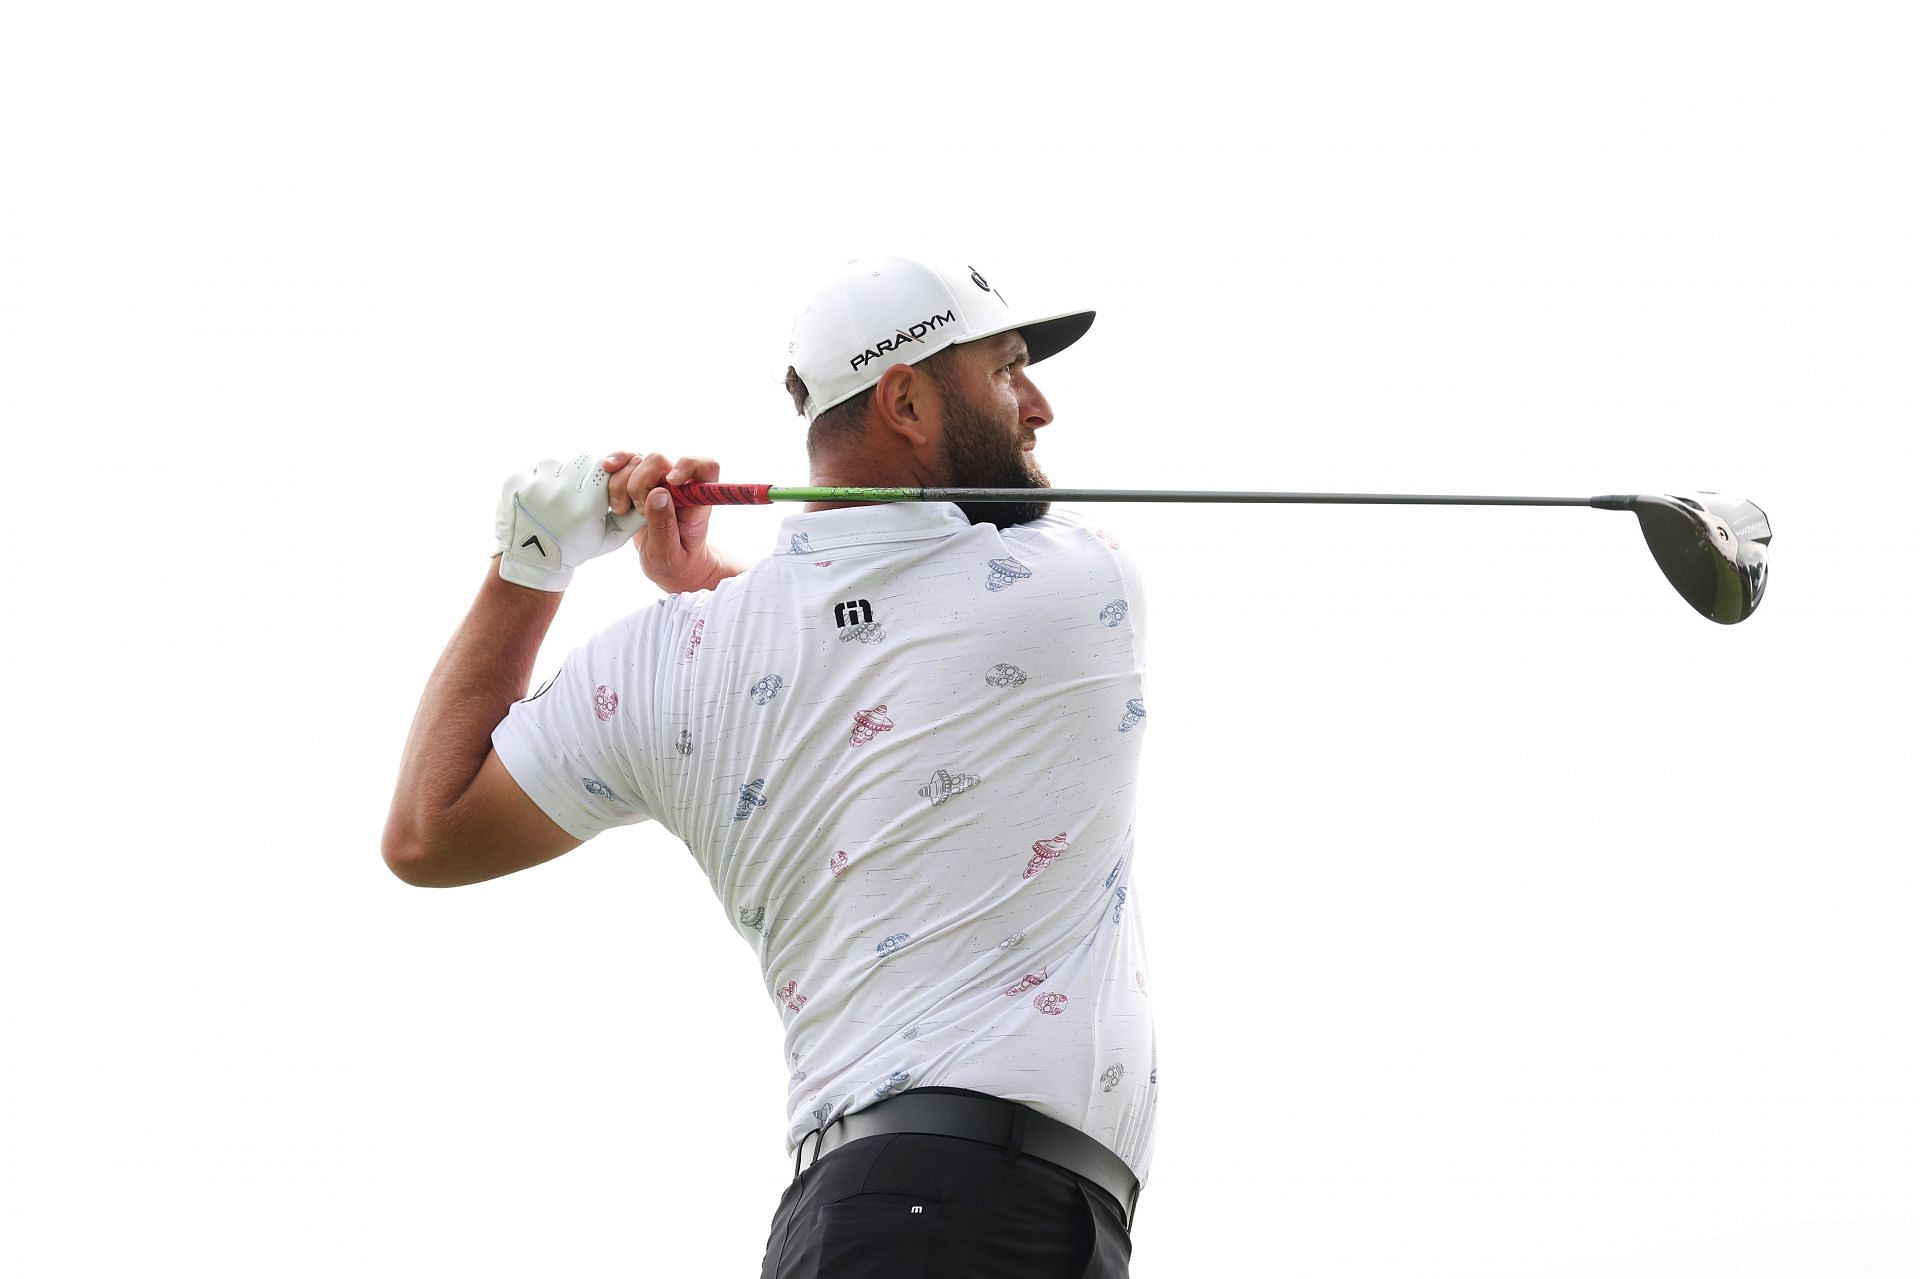 Jon Rahm is ranked No. 2 in the Official World Golf Rankings despite failing to make the cut at the Travelers Championship